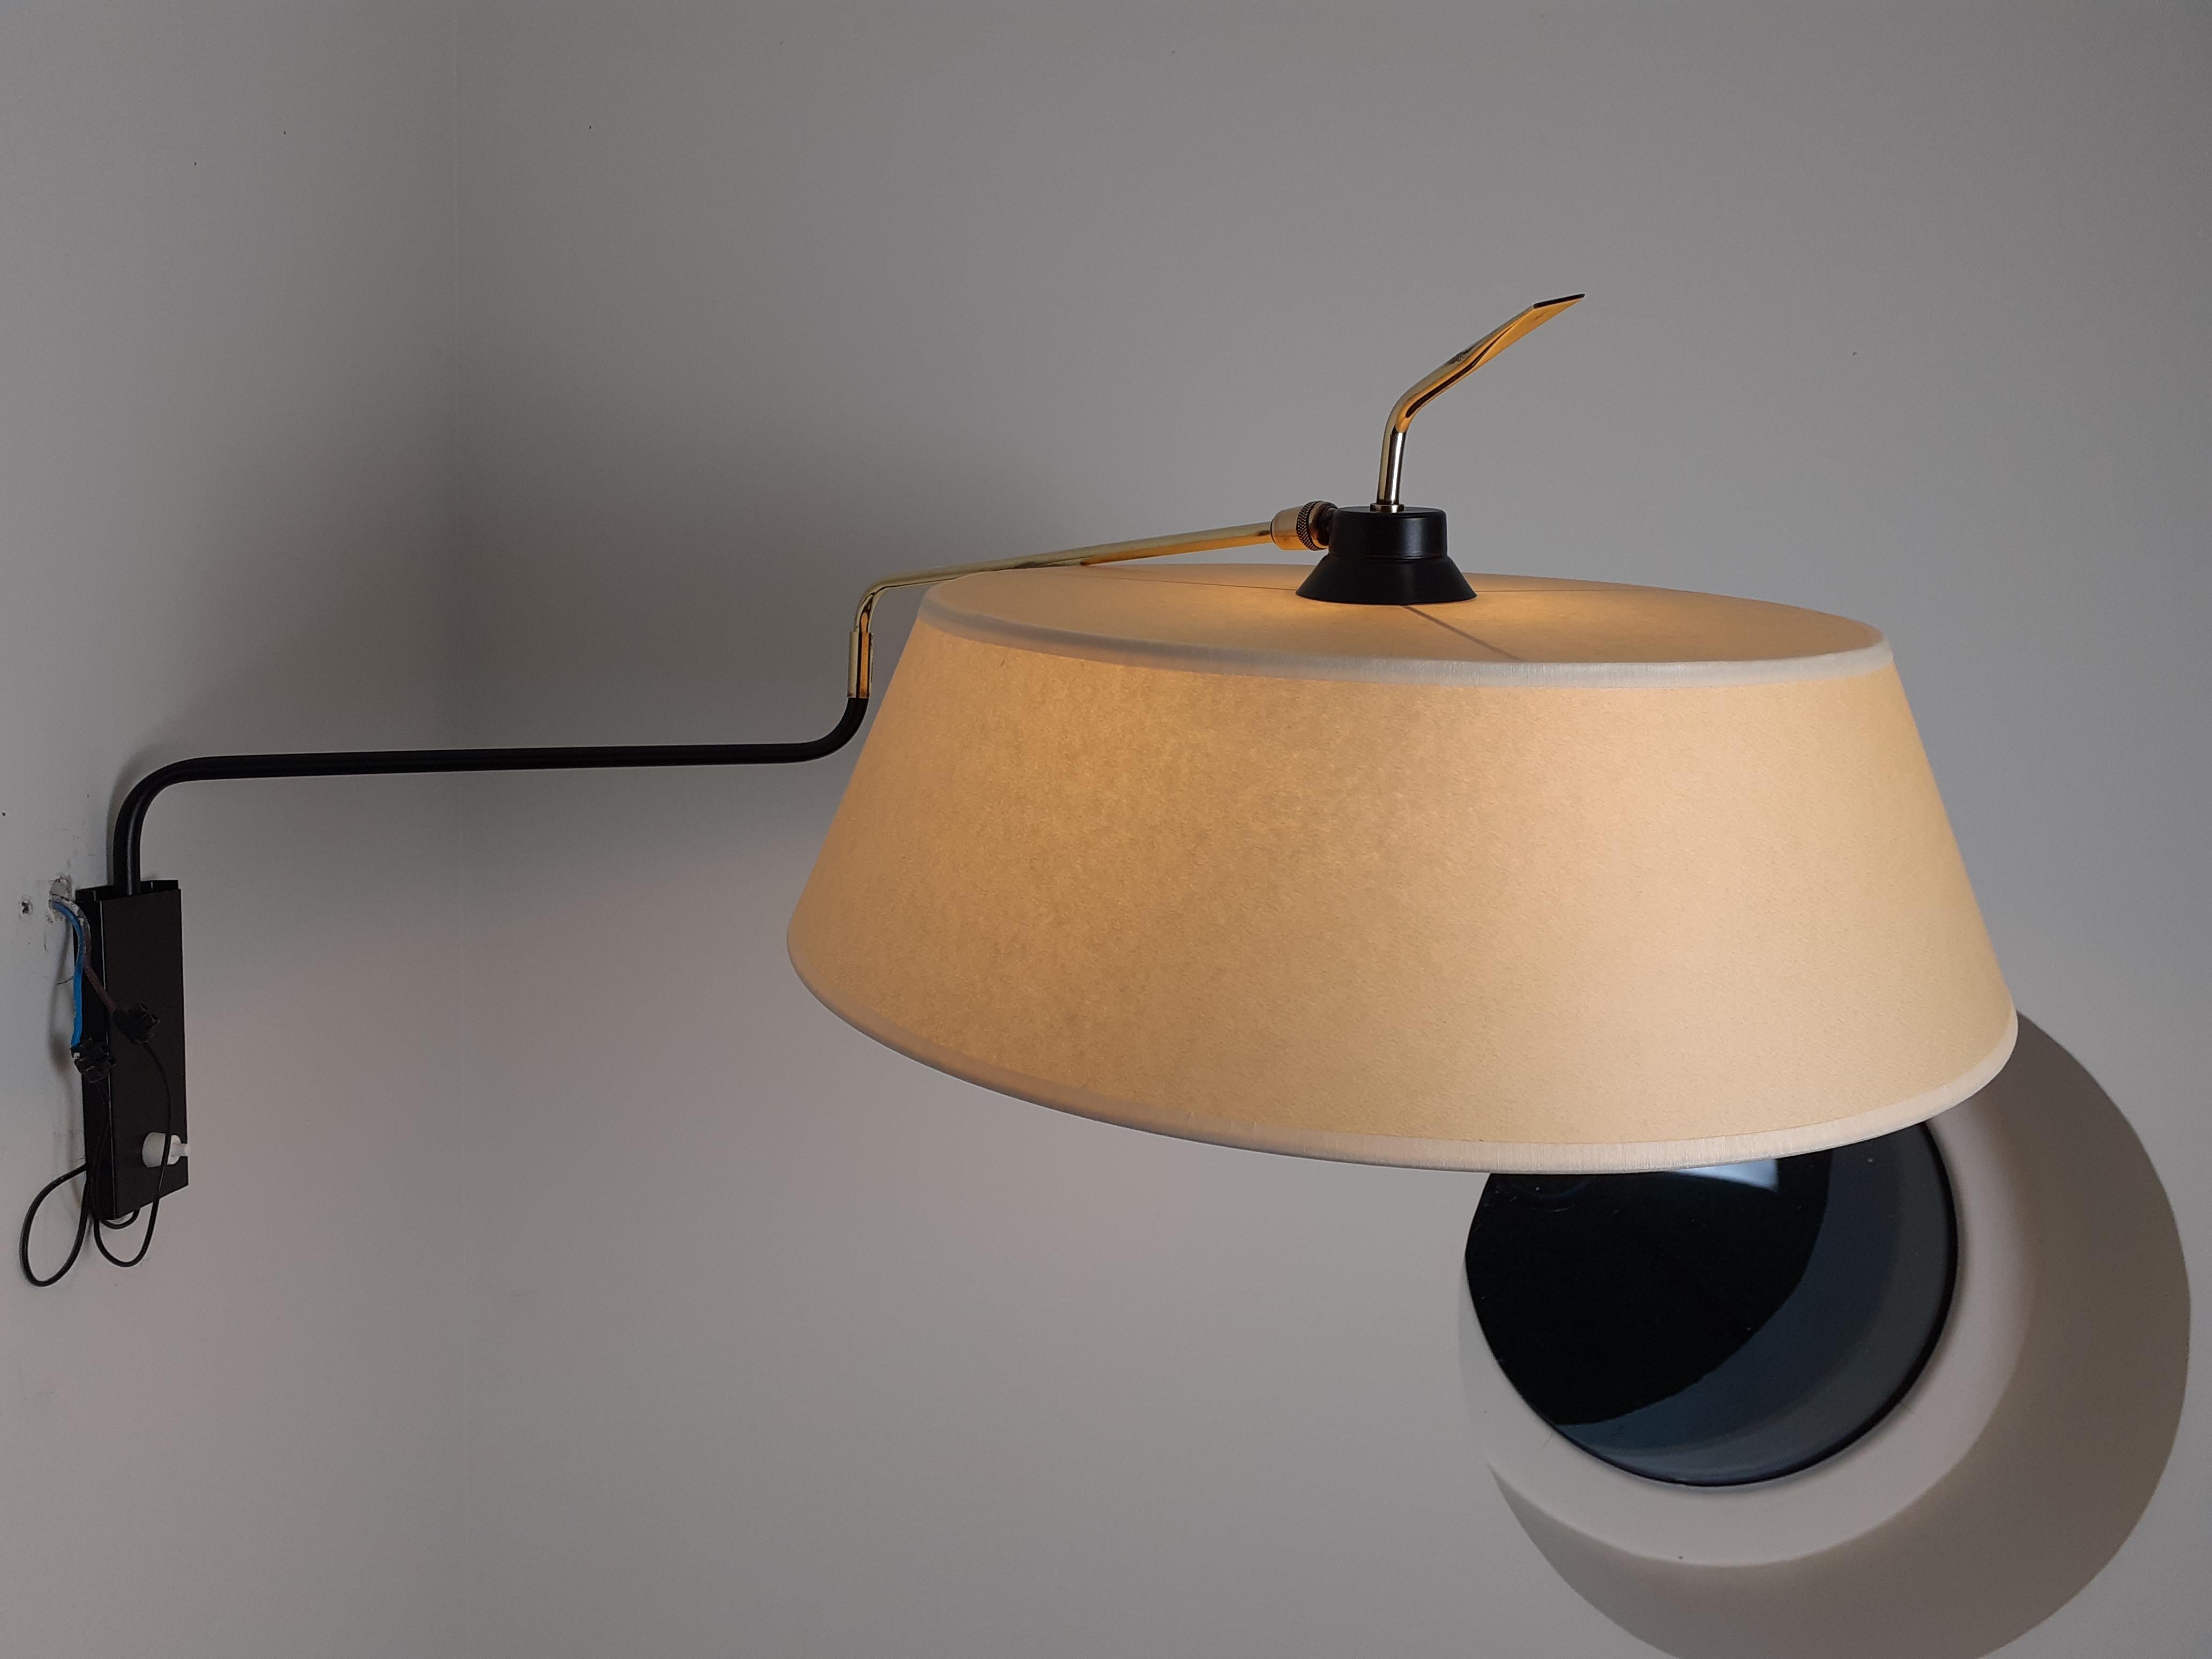 Wall lamp in black lacquered metal and brass, consisting of a rectangular base in black lacquered metal on which is arranged an arm of light in brass and lacquered metal.
The arm is articulated at its center and can be oriented.
It is finished by